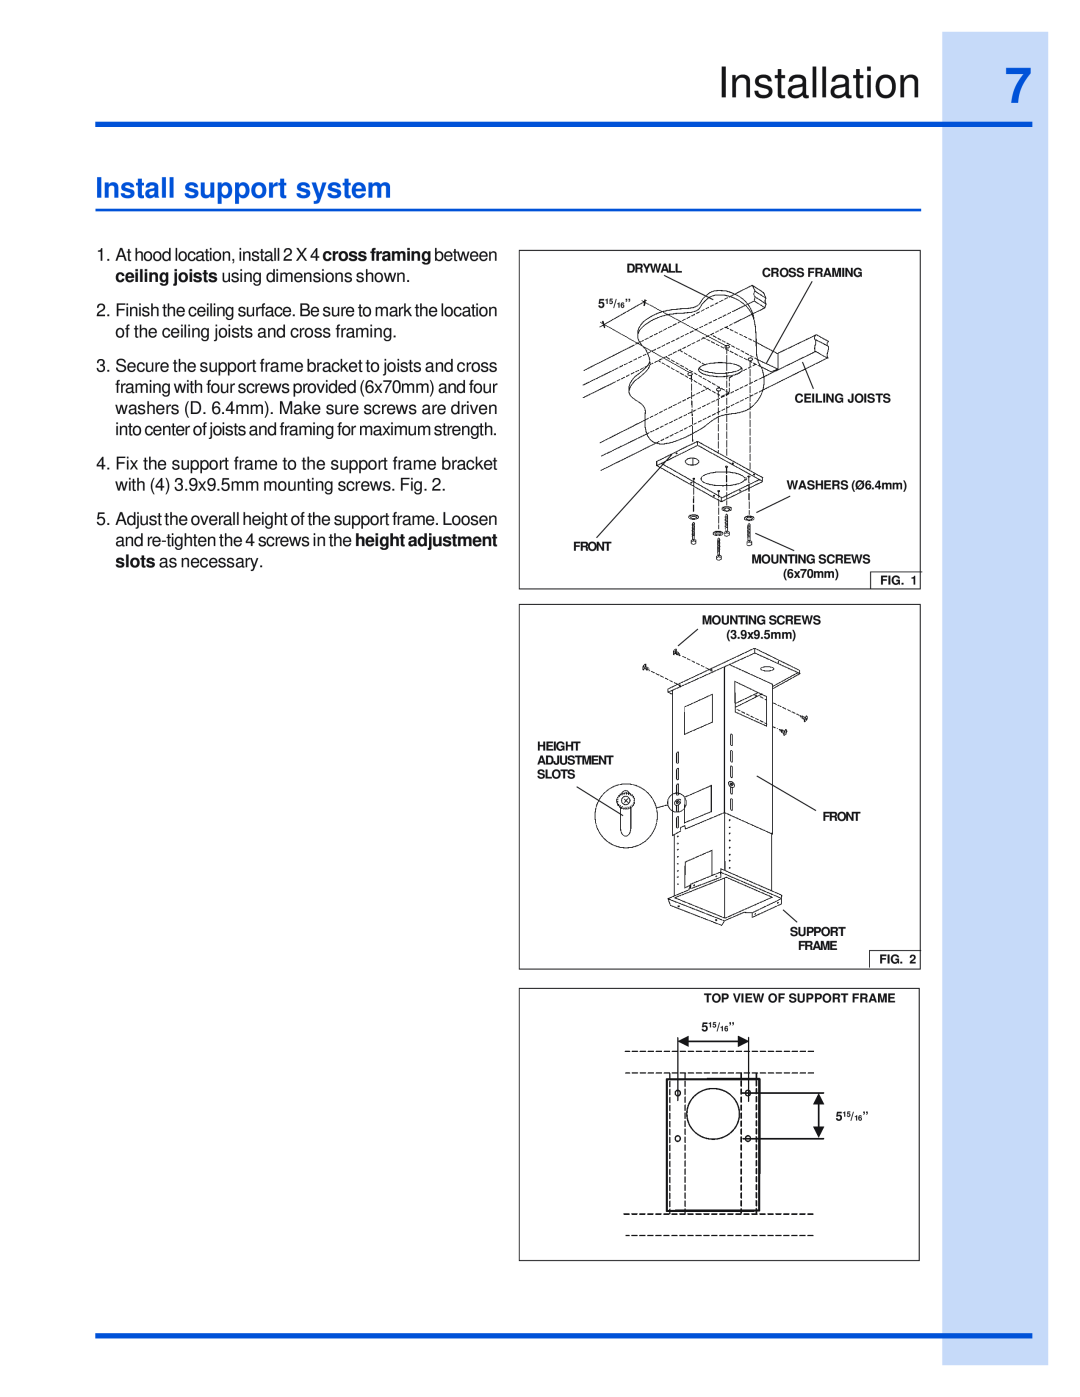 Electrolux 316495008 installation instructions Installation, Install support system 